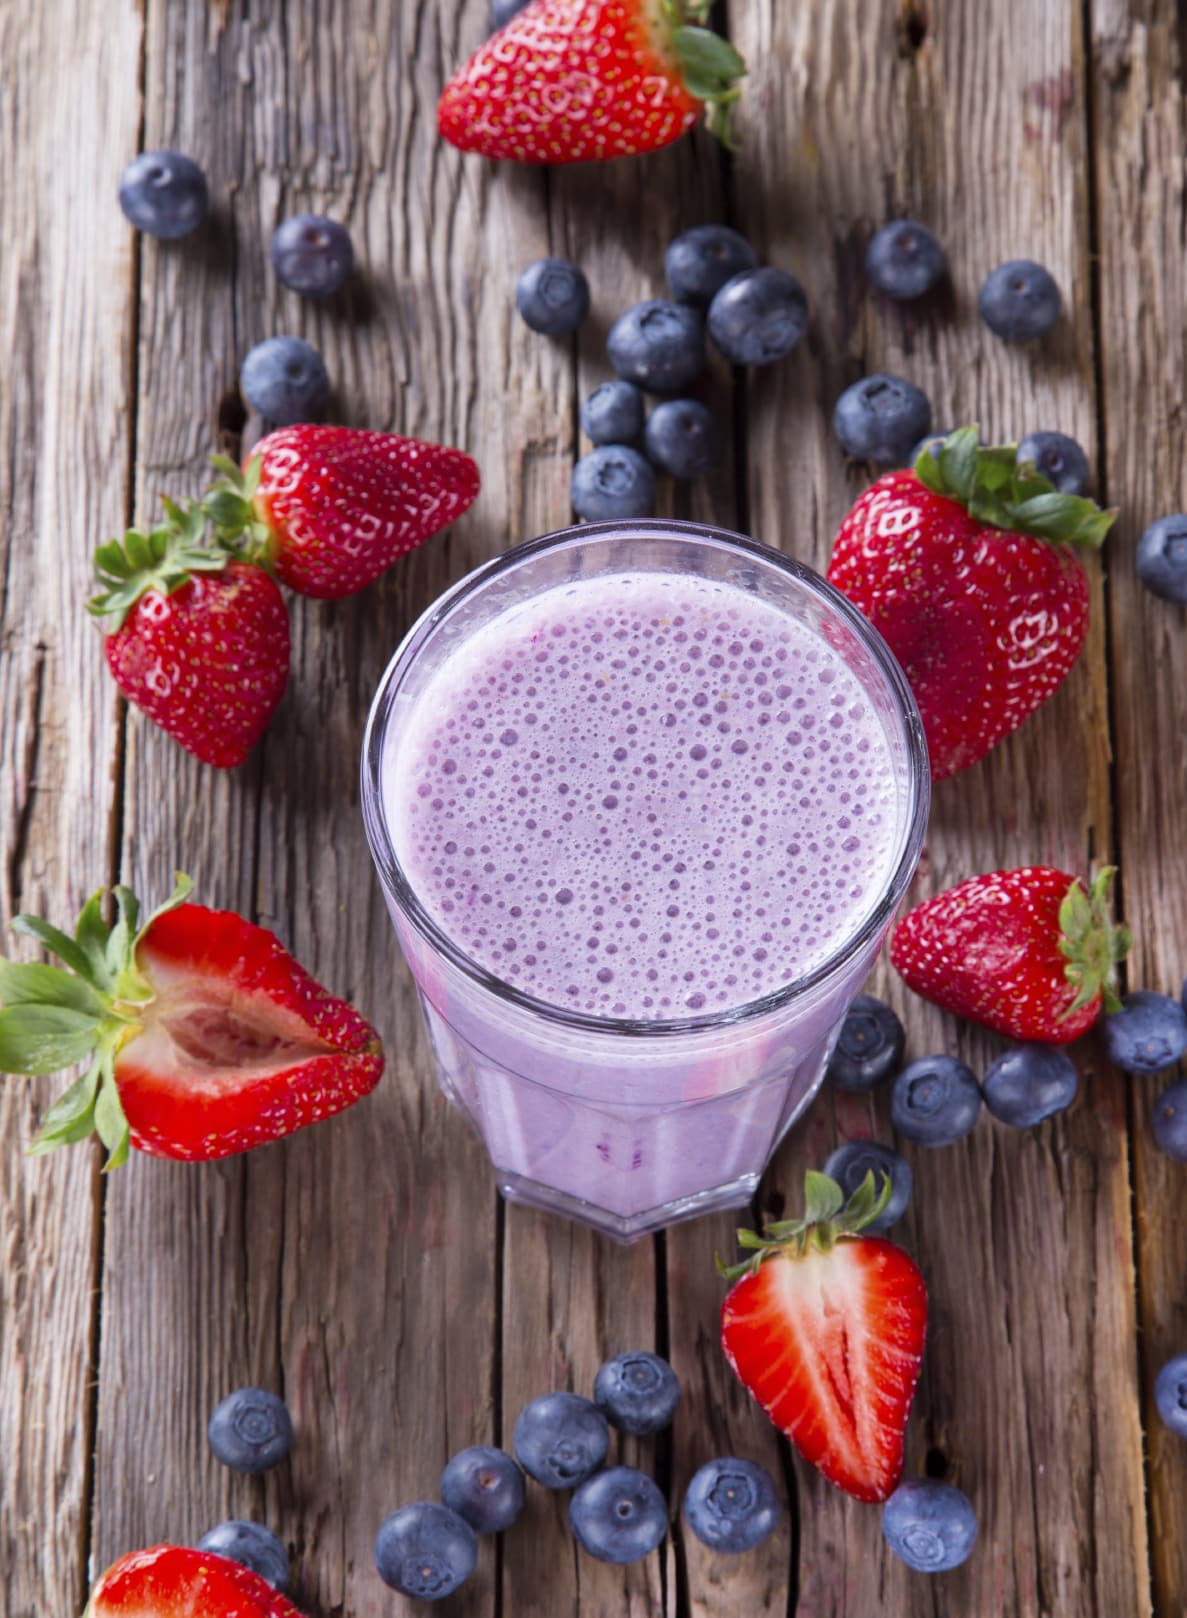 Get festive with this healthy Red, White, and Blueberry Smoothie recipe!